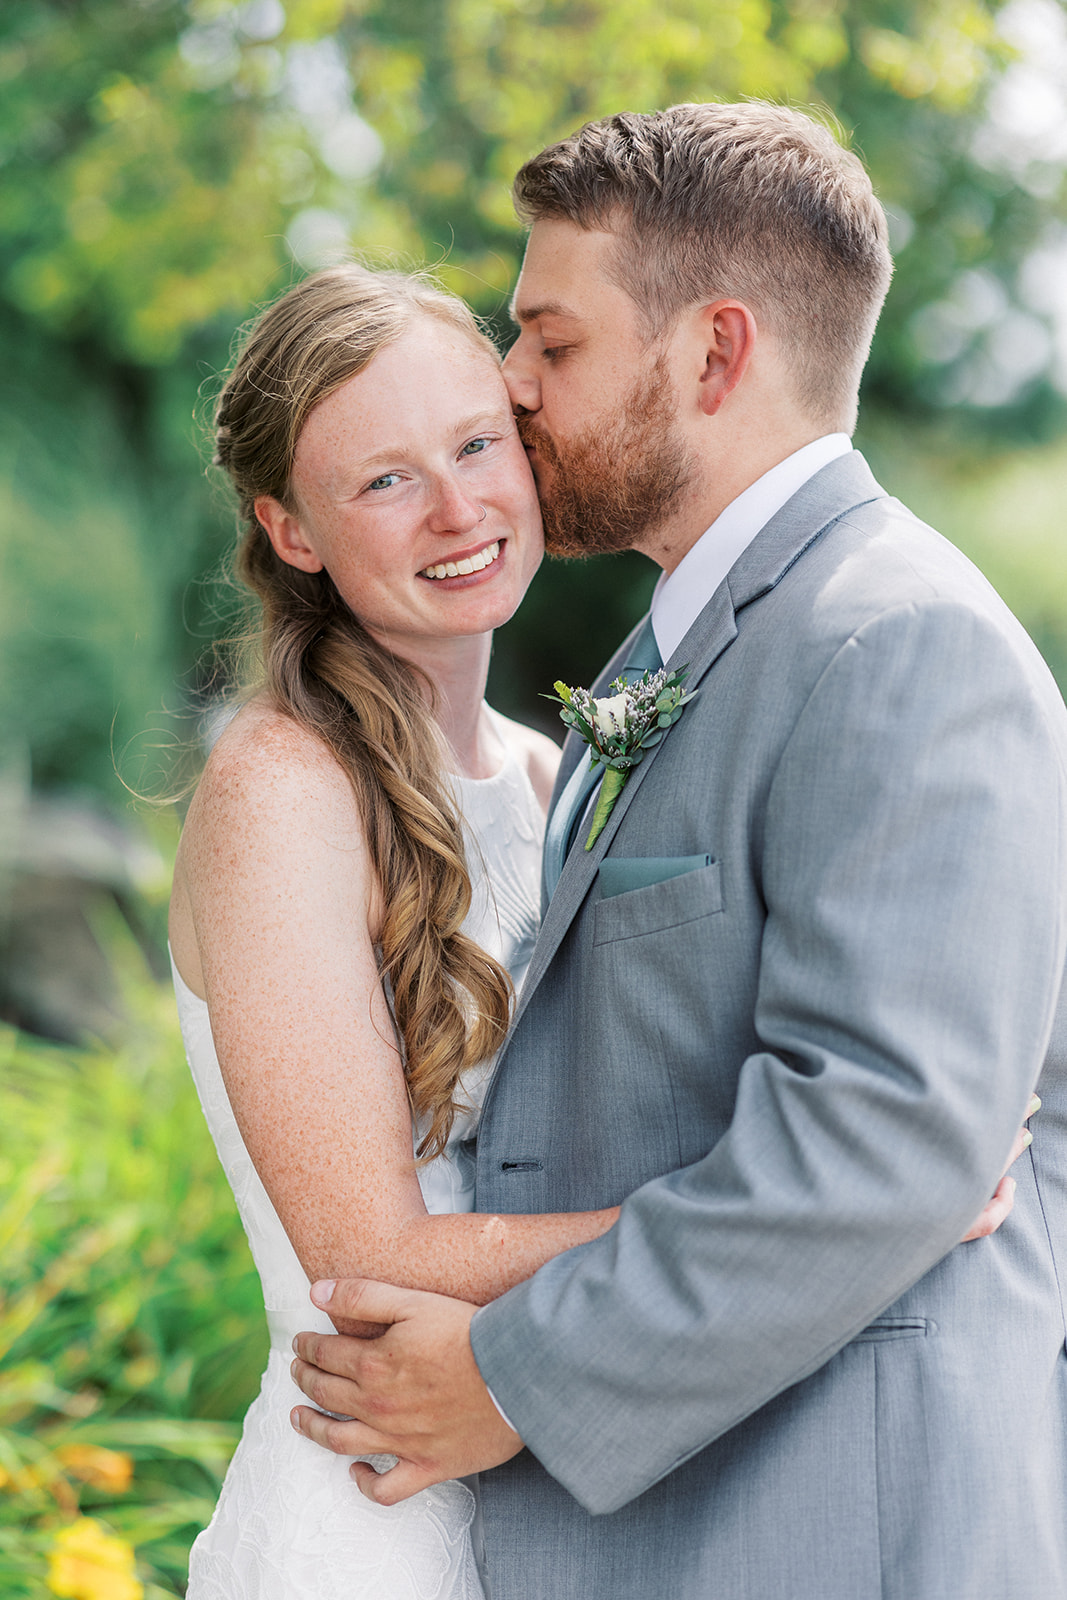 A groom in a grey suit kisses the cheek of his bride in a white lace dress at a Galloping Hill Wedding